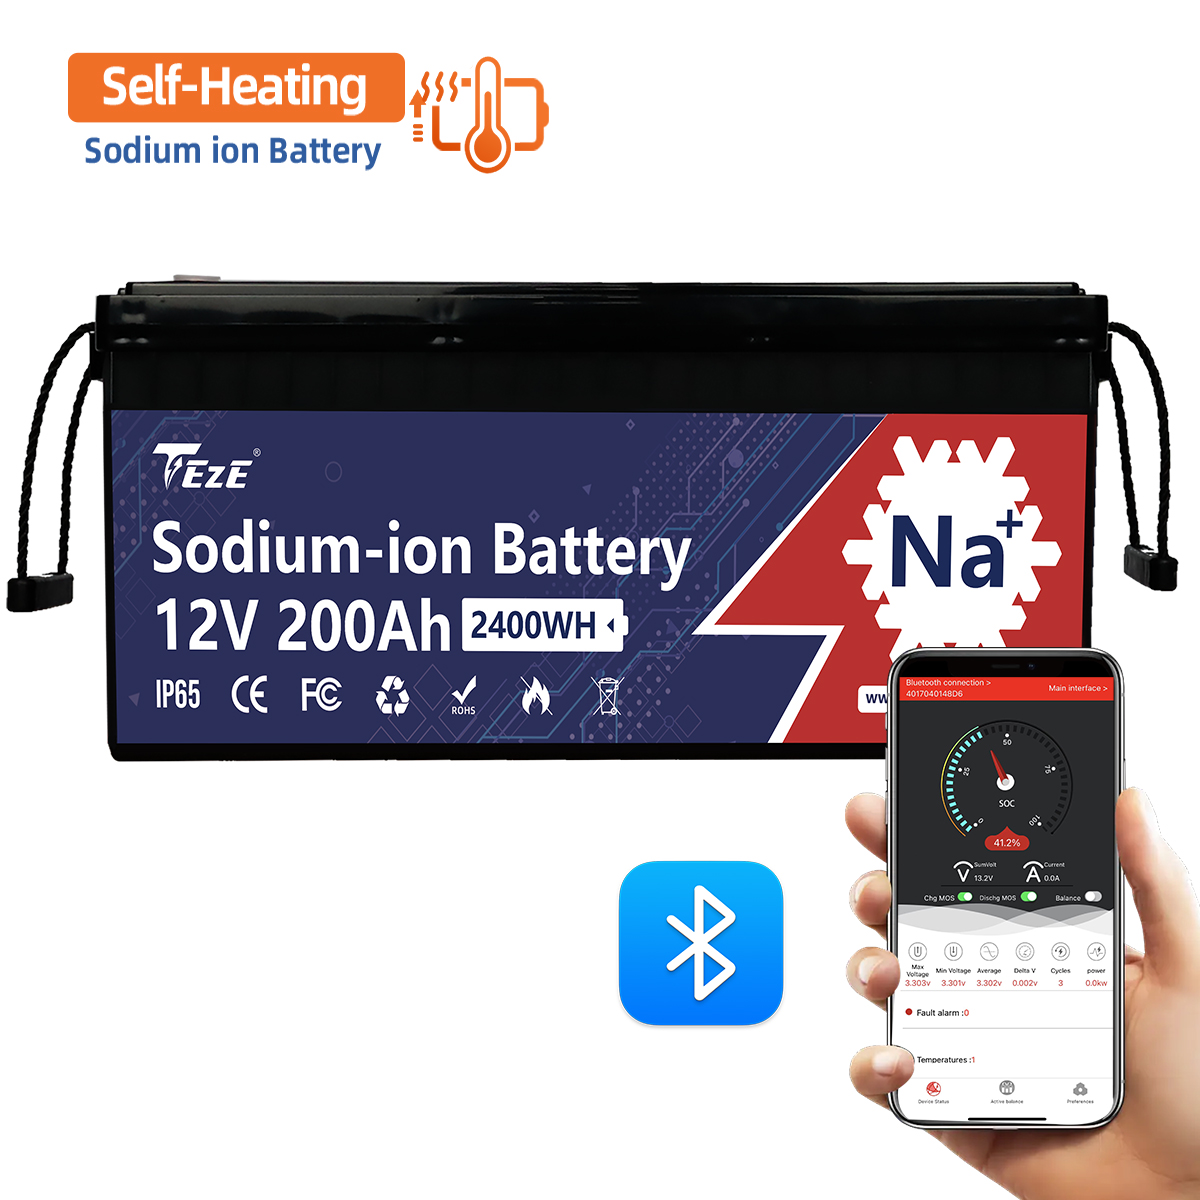 TezePower 12V 200Ah Sodium ion Battery with Bluetooth, Self-heating and Active Balancer, Built-in 200A Daly BMS (Bluetooth Built-in Version)-TezePower